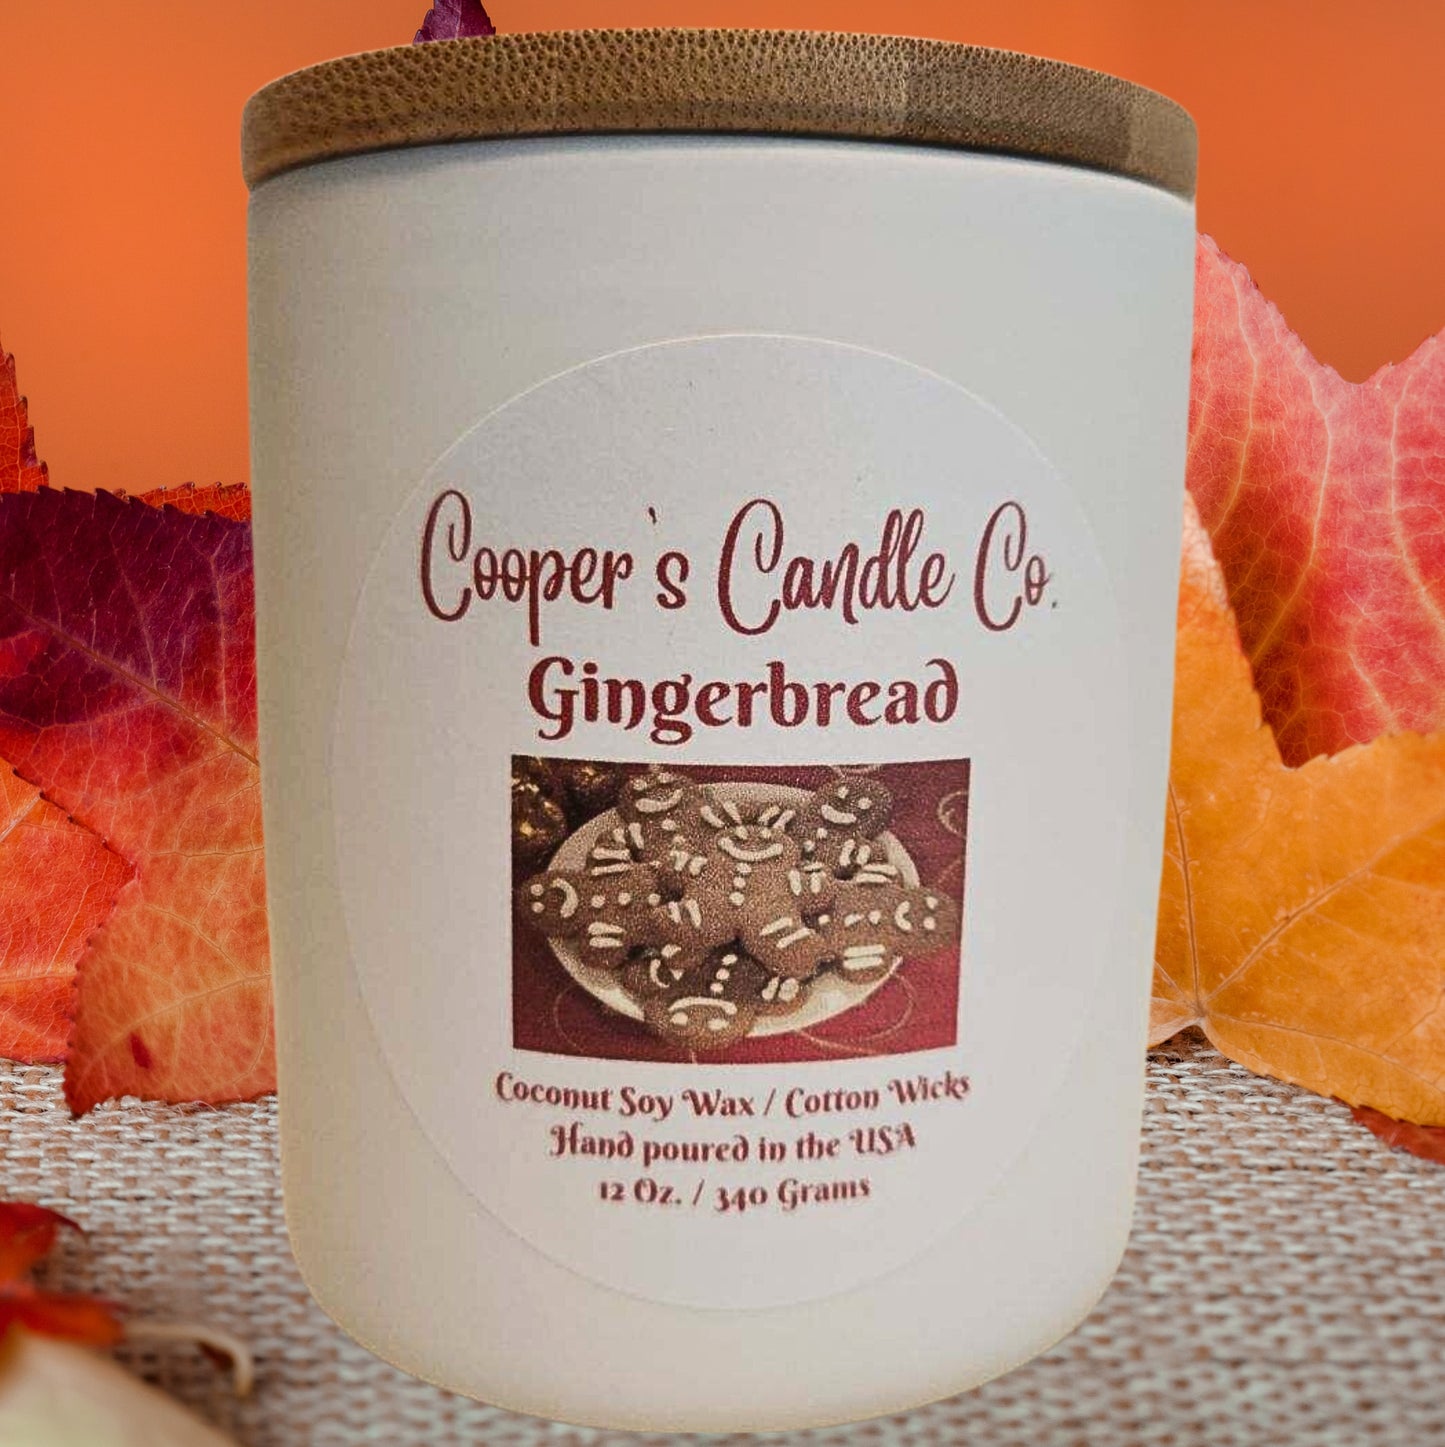 Gingerbread Scented Candle A winter treat with this gingerbread scent.